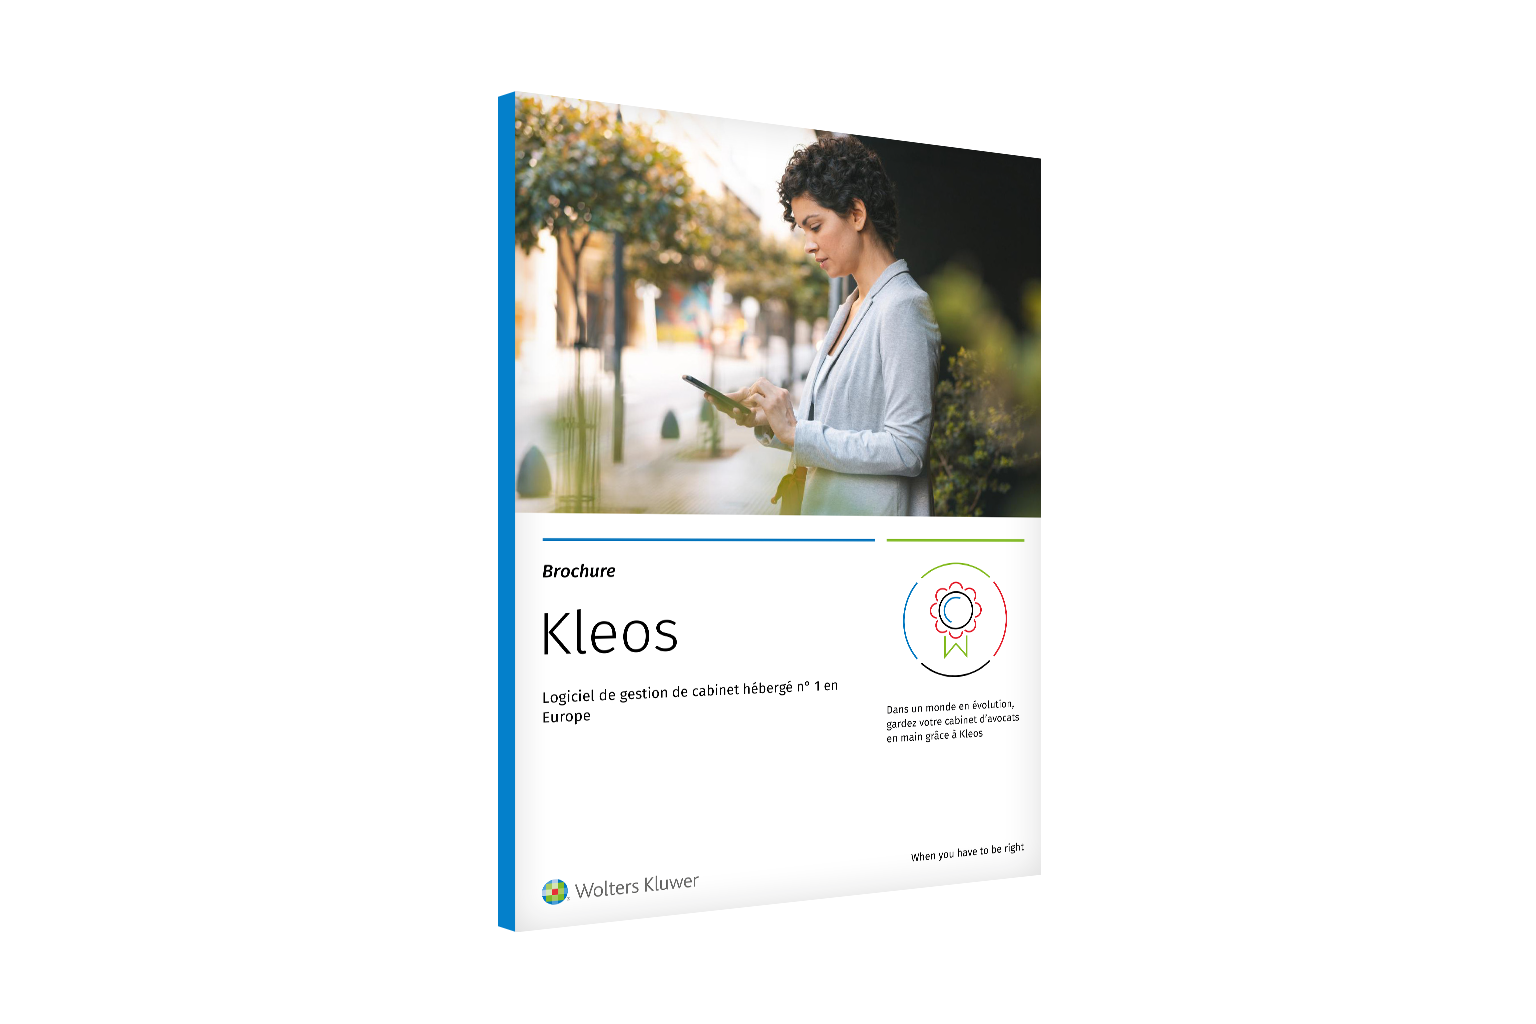 WK_Kleos_Brochure_BE-FR_cover_1536x1024.png